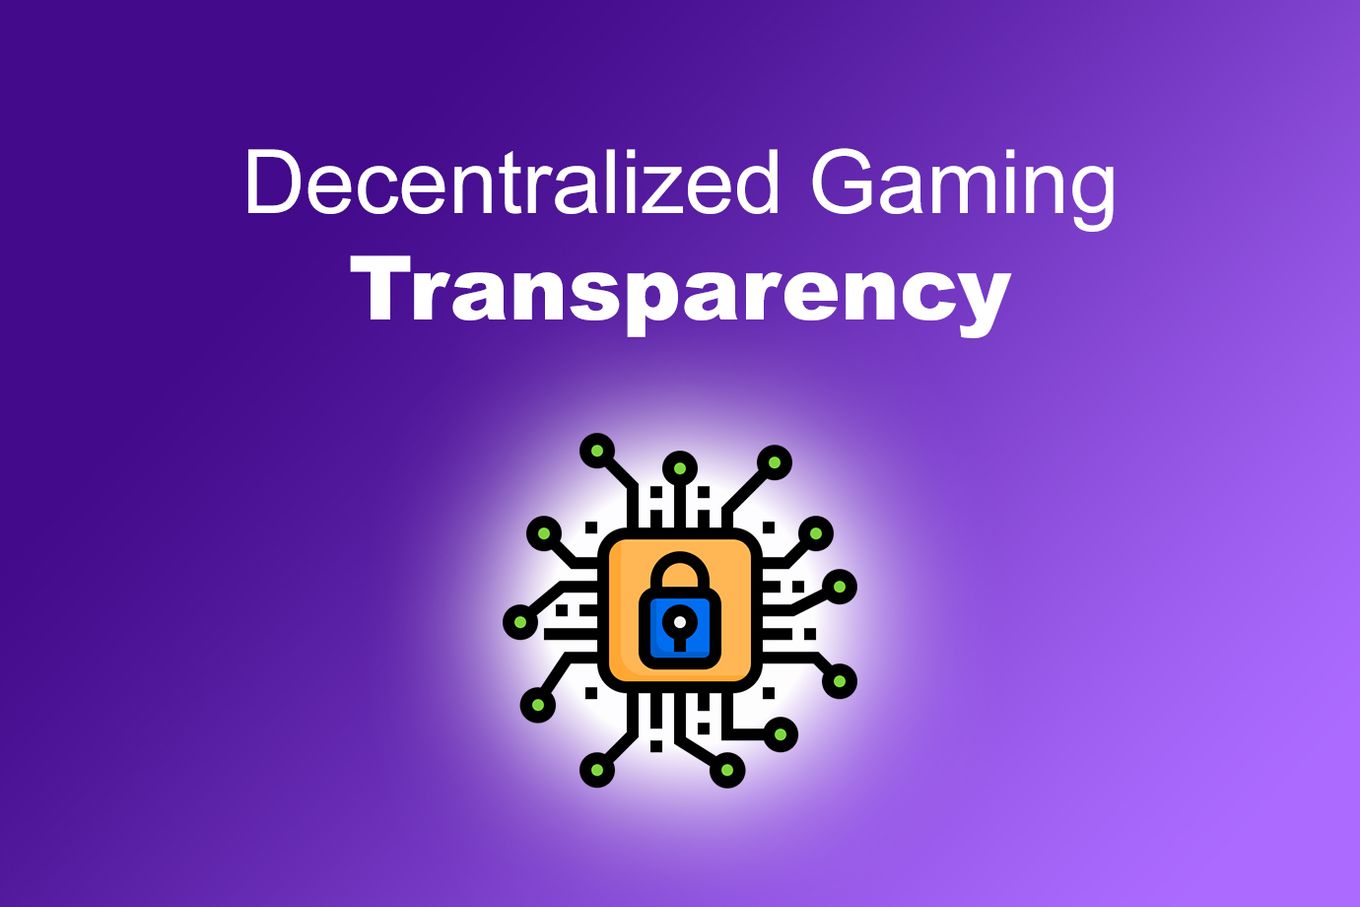  Decentralized Gaming - Transparency